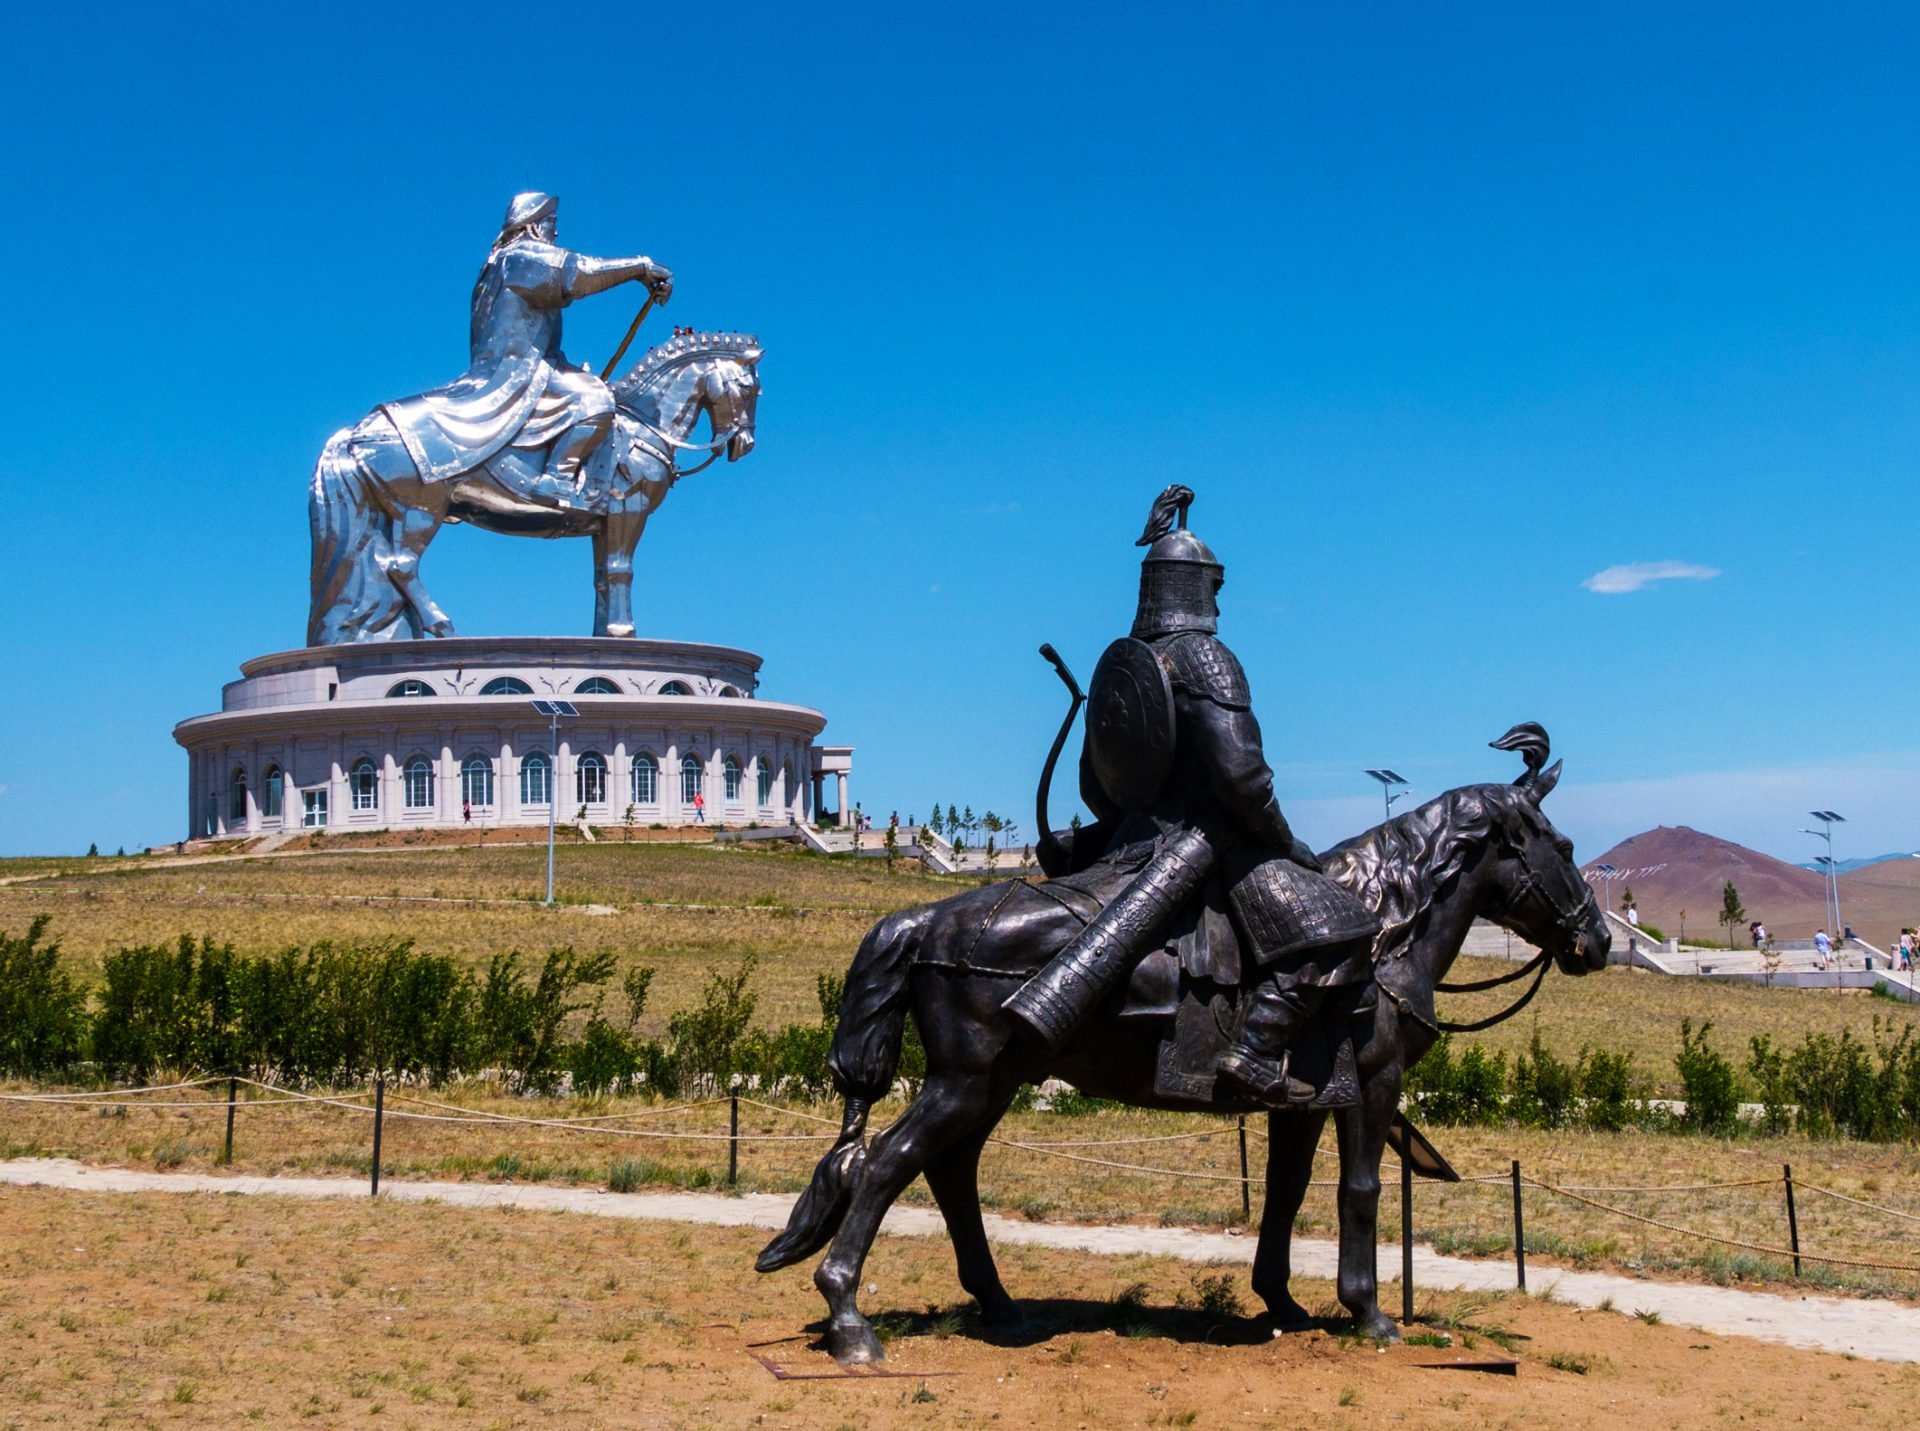 A photo of two statues of men on horses in a park in Mongolia. One statue is in the foreground and shows a man in armor with a sword and a rearing horse. The other statue is in the background and shows Genghis Khan, the world's largest 40-meter equestrian statue.